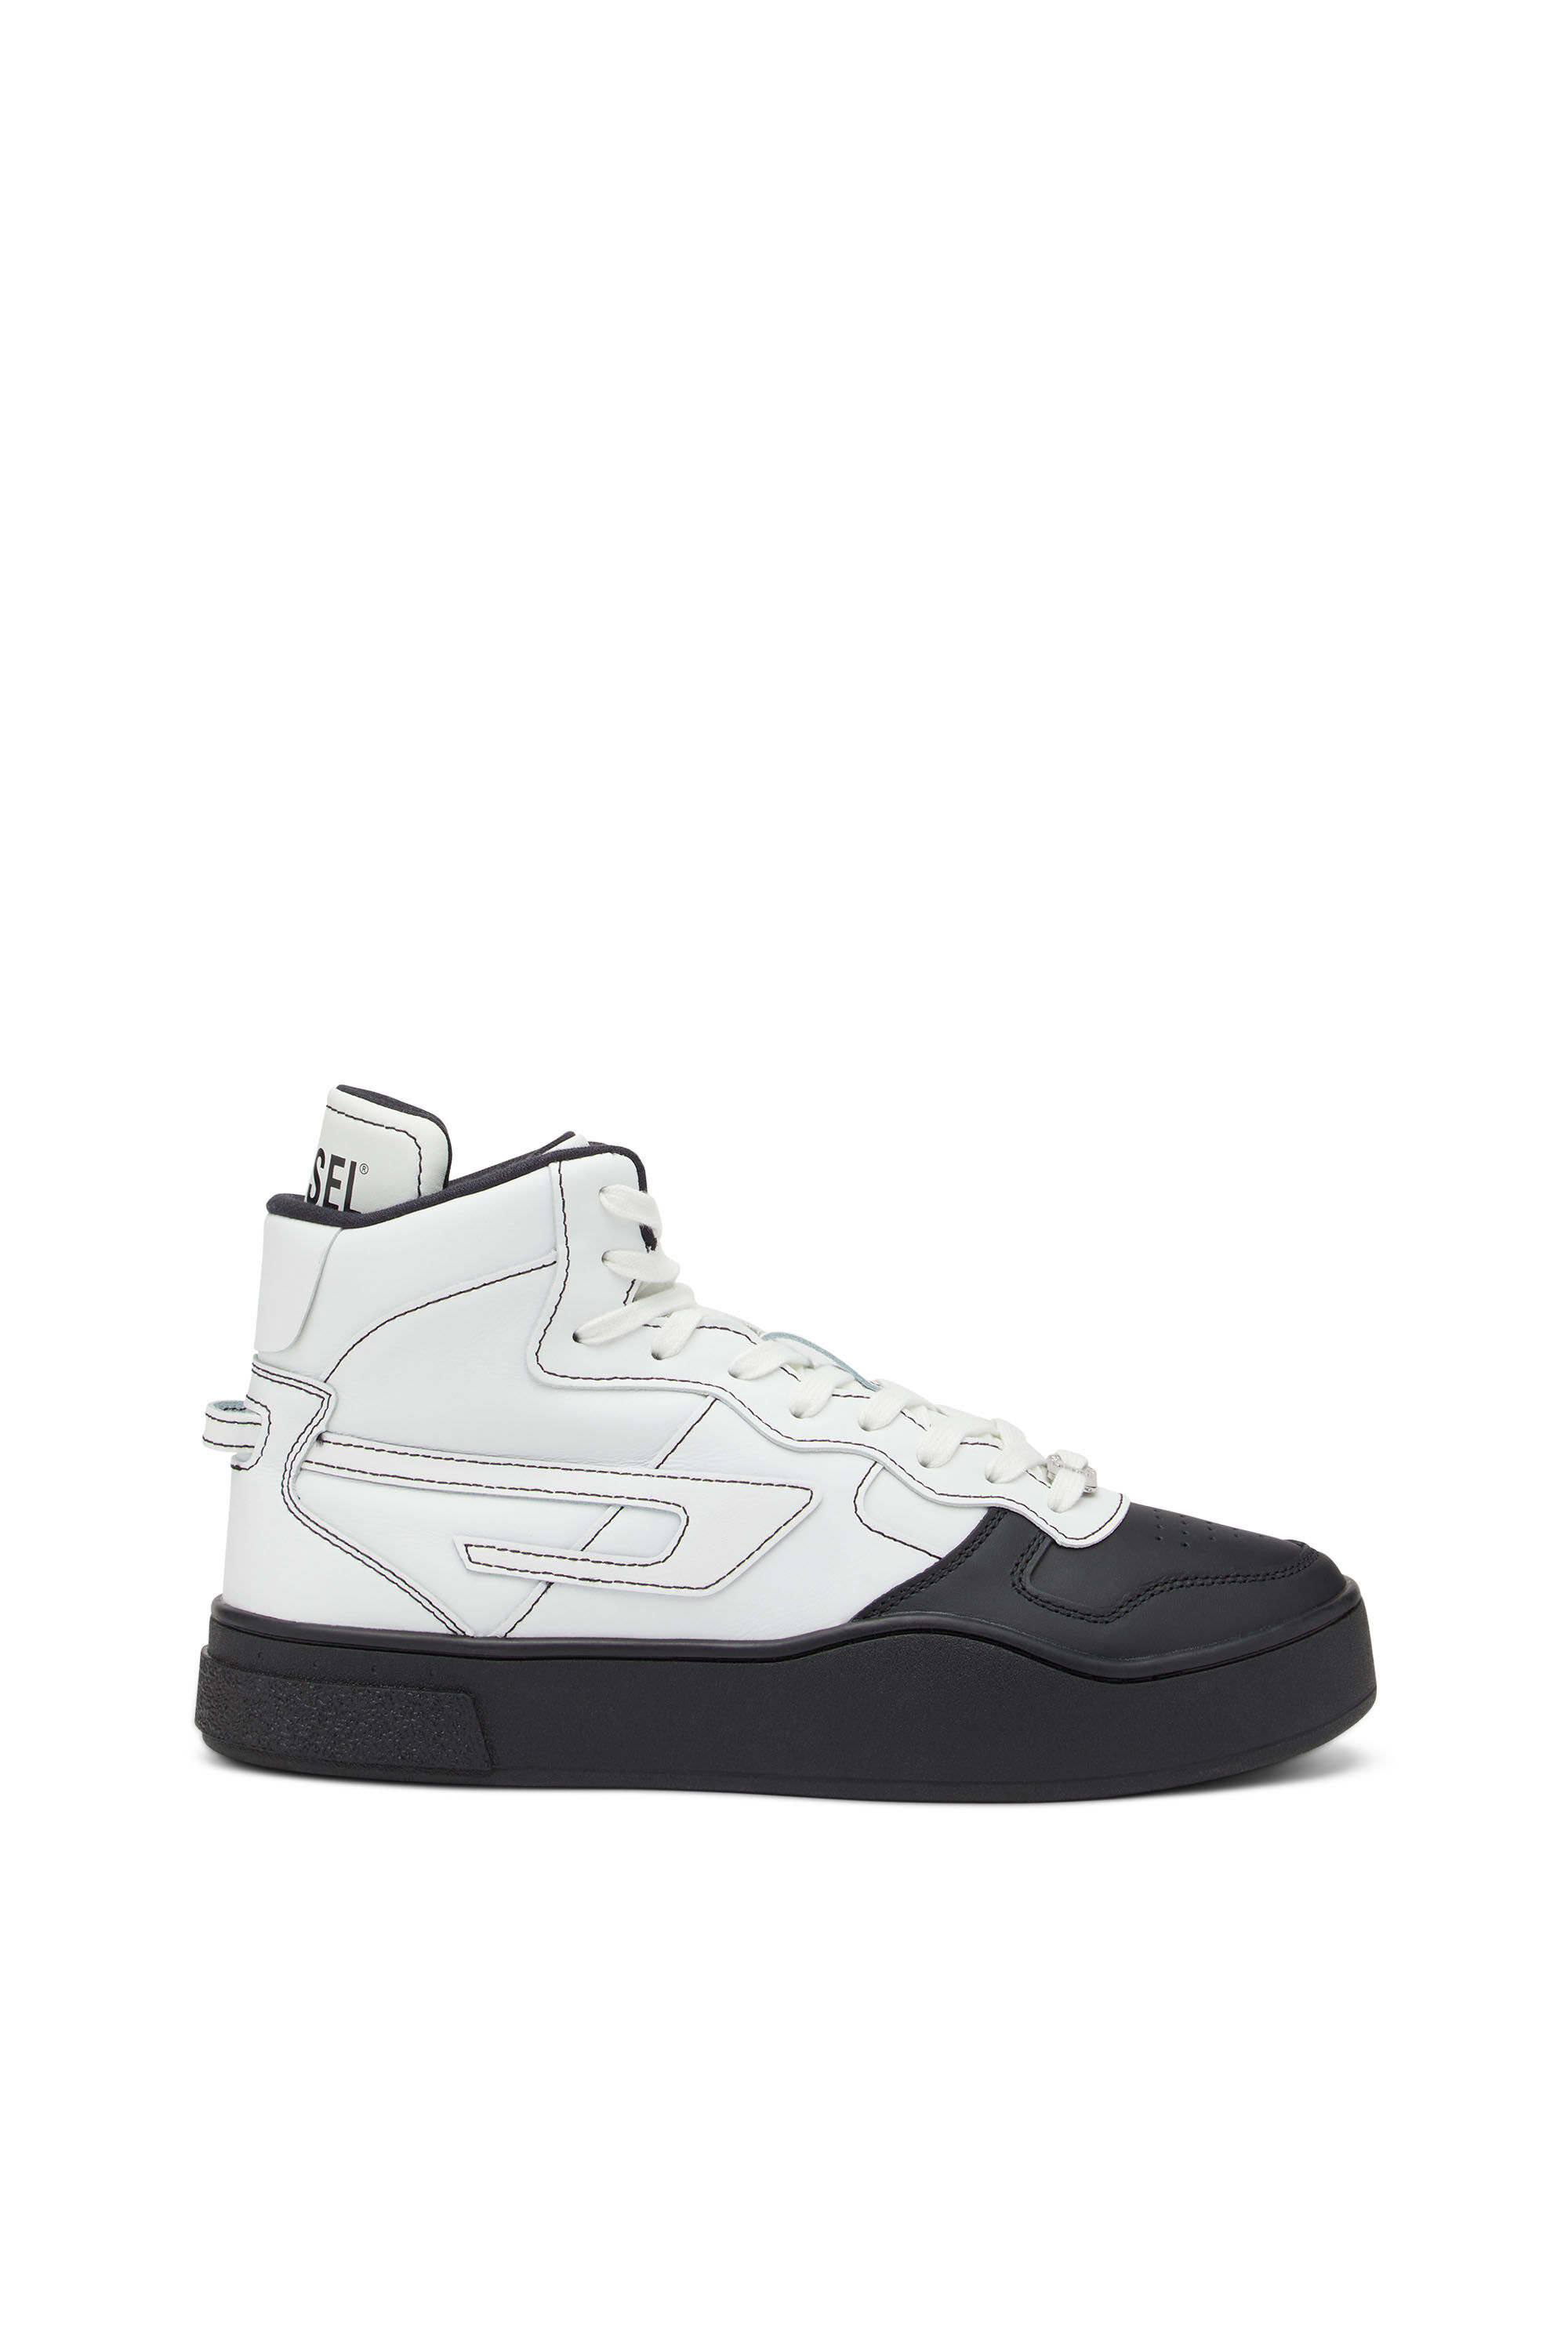 Steward Inflate Get used to S-UKIYO MID X Unisex: High-top sneakers with logo collar | Diesel